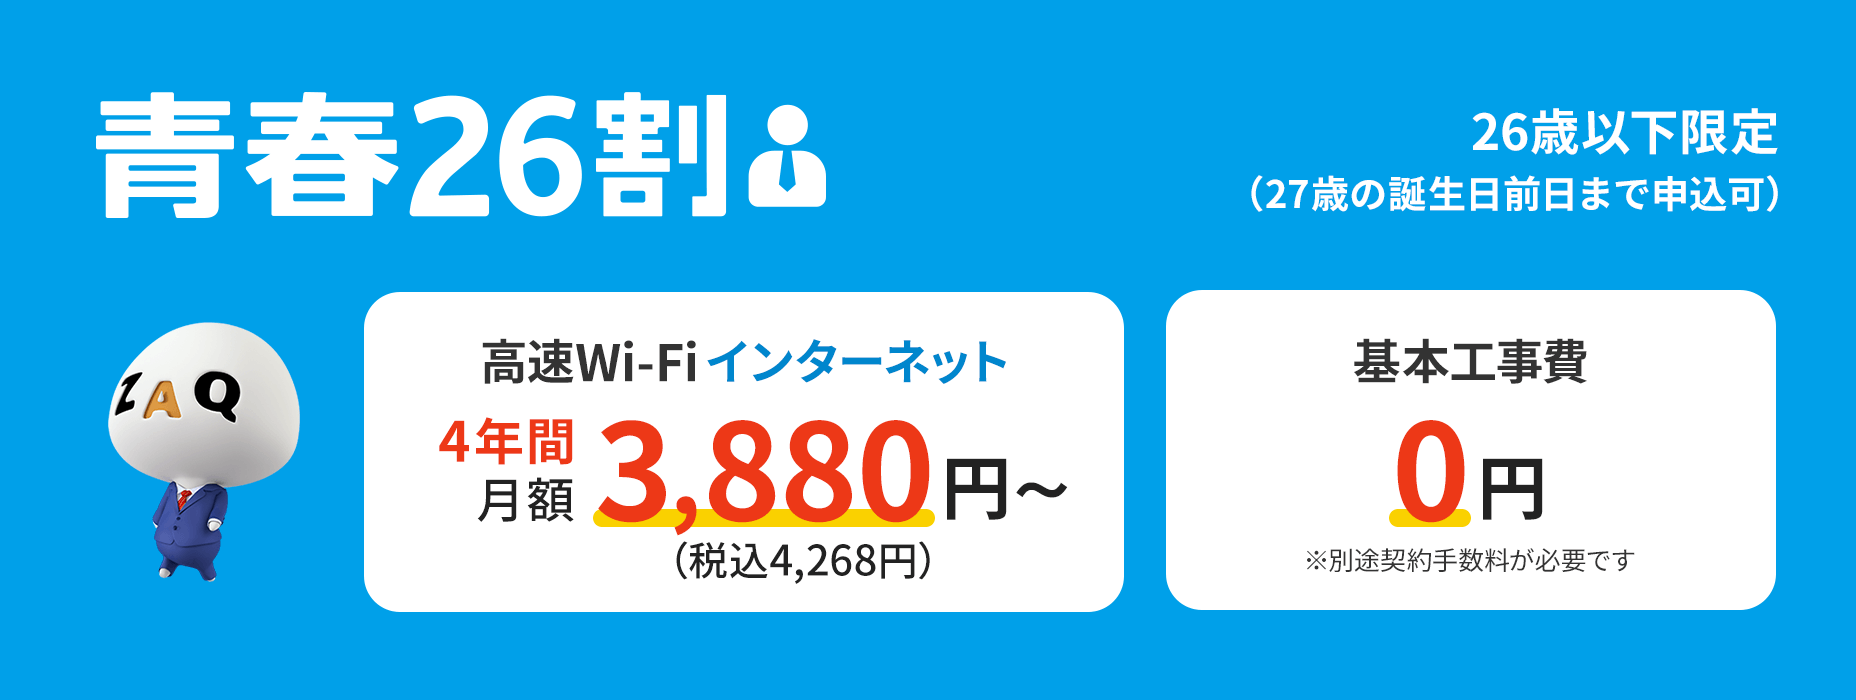 Get great deals on Wi-Fi internet with Seishun 26 Wari discount (limited to those under 26)